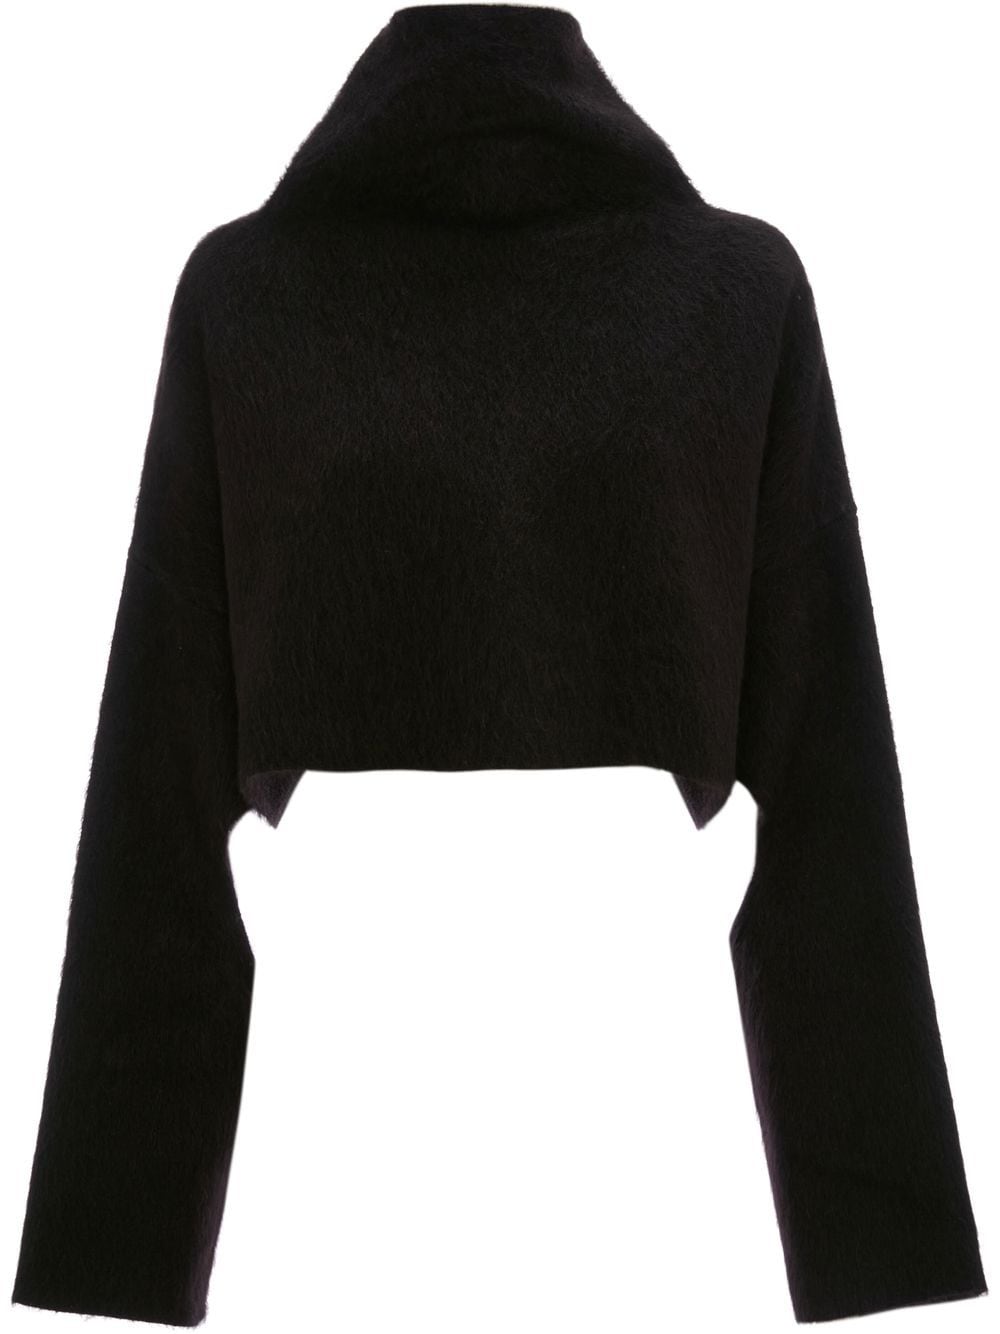 JW Anderson cut-out oversized cropped jumper - Black von JW Anderson